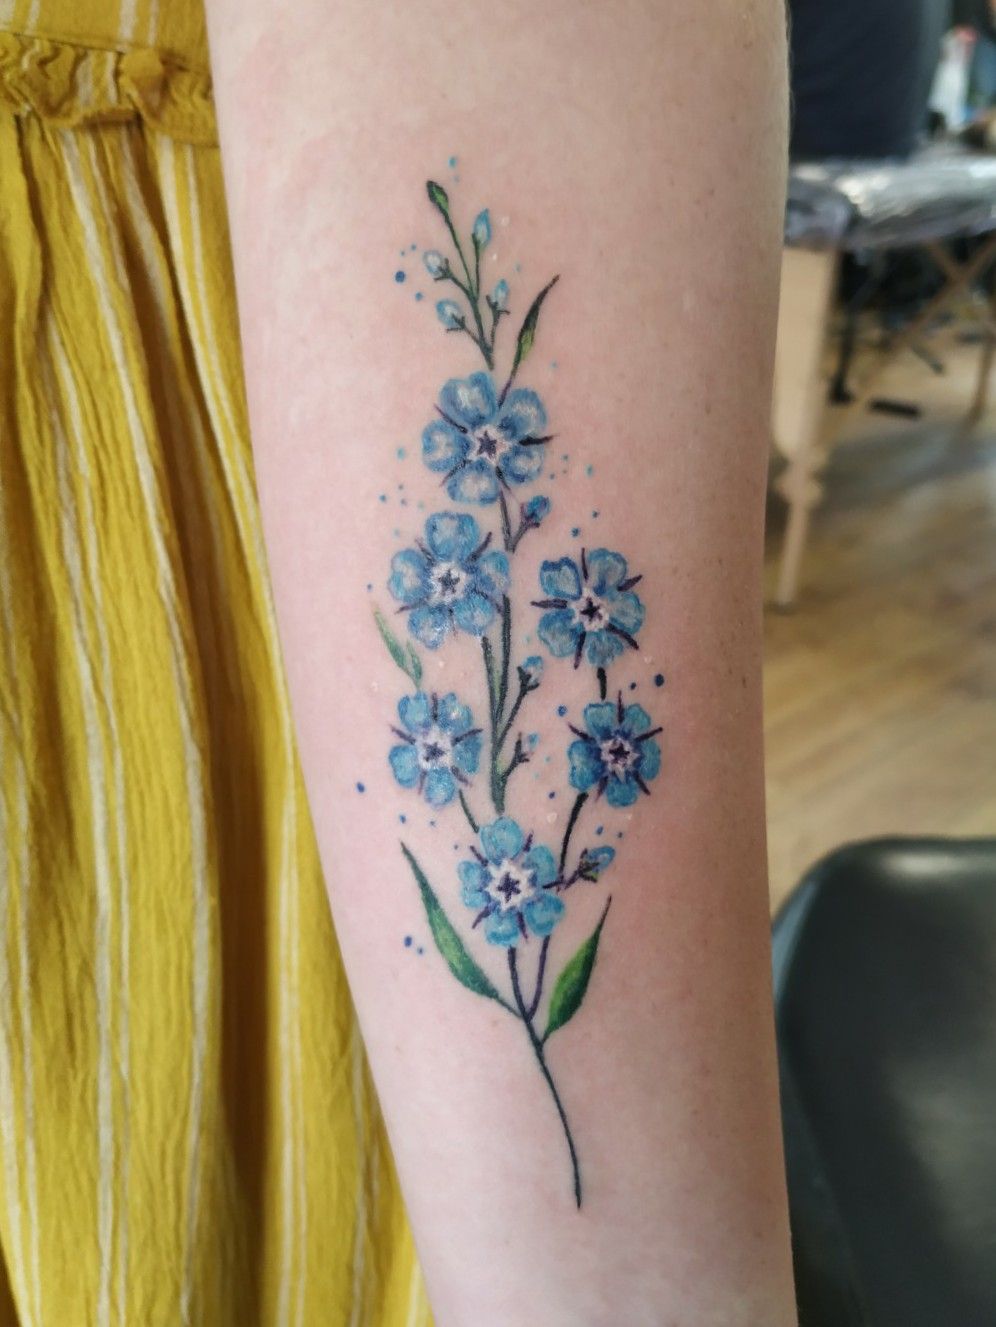 Cute little forget me not tattoo by Mentjuh on DeviantArt